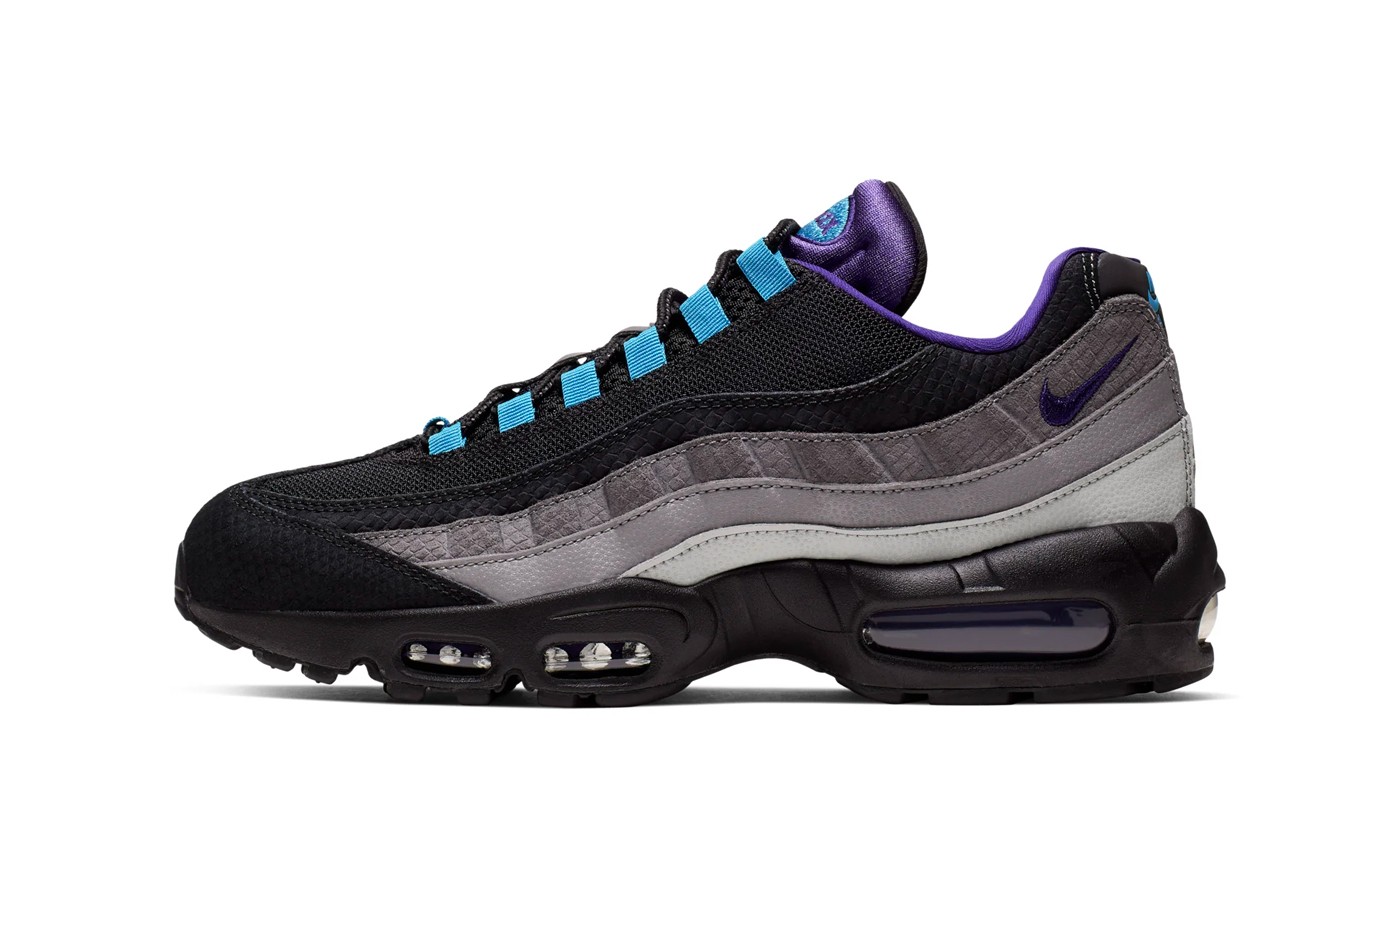 The Nike Air Max 95 Lv8 Gets A Reverse Grape Makeover The Sole